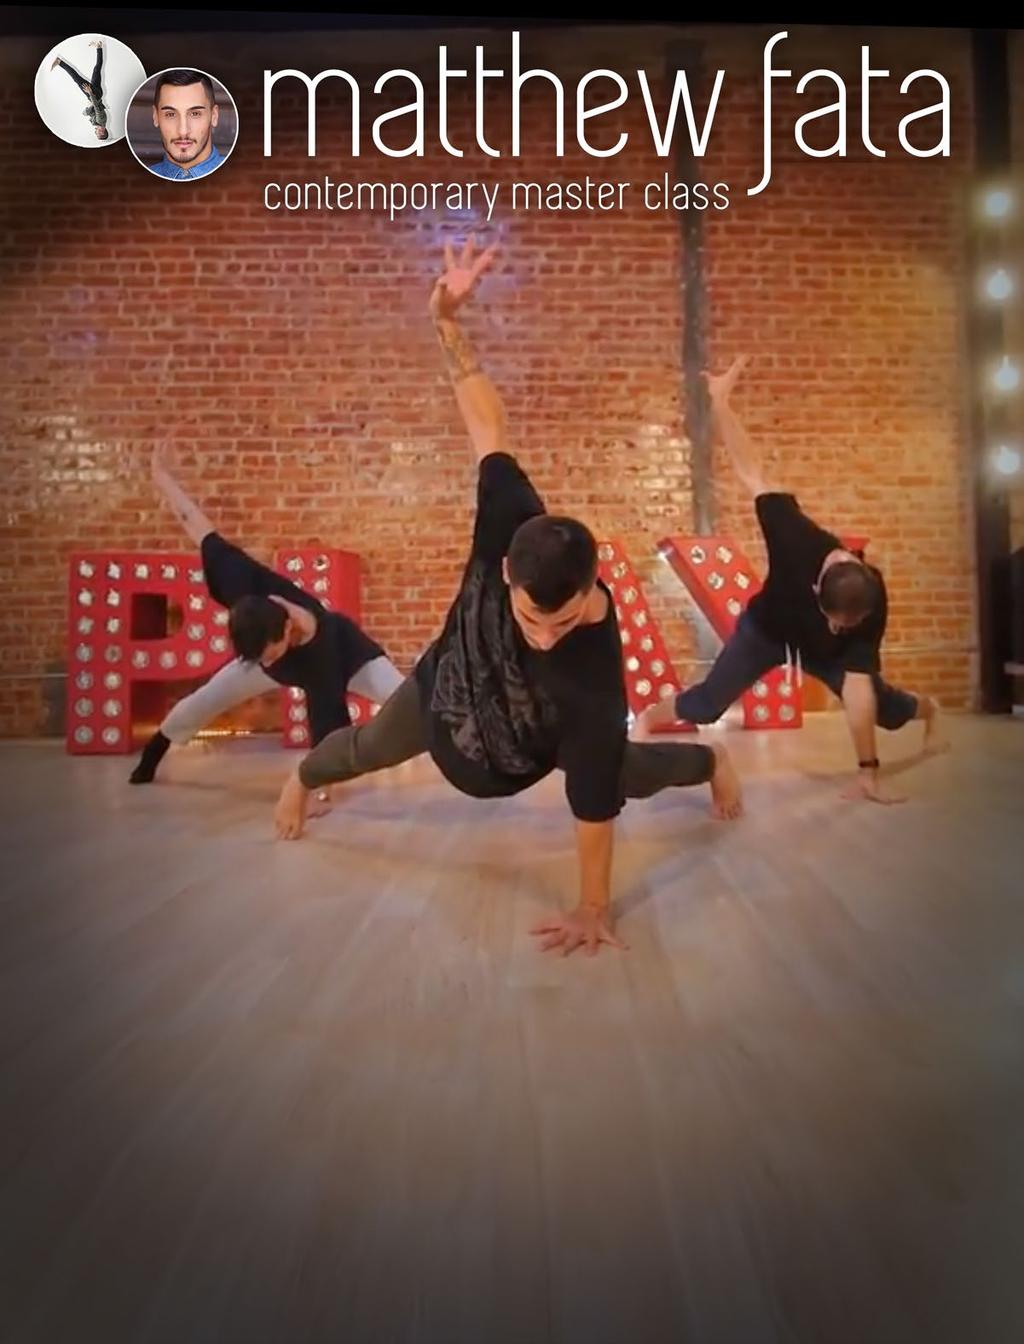 August 22nd Intermediate 5:30-7:00p Advanced 7:30-9:00p Storm Dance Alliance is proud to annouce a very special master class with elite contemporary dancer and